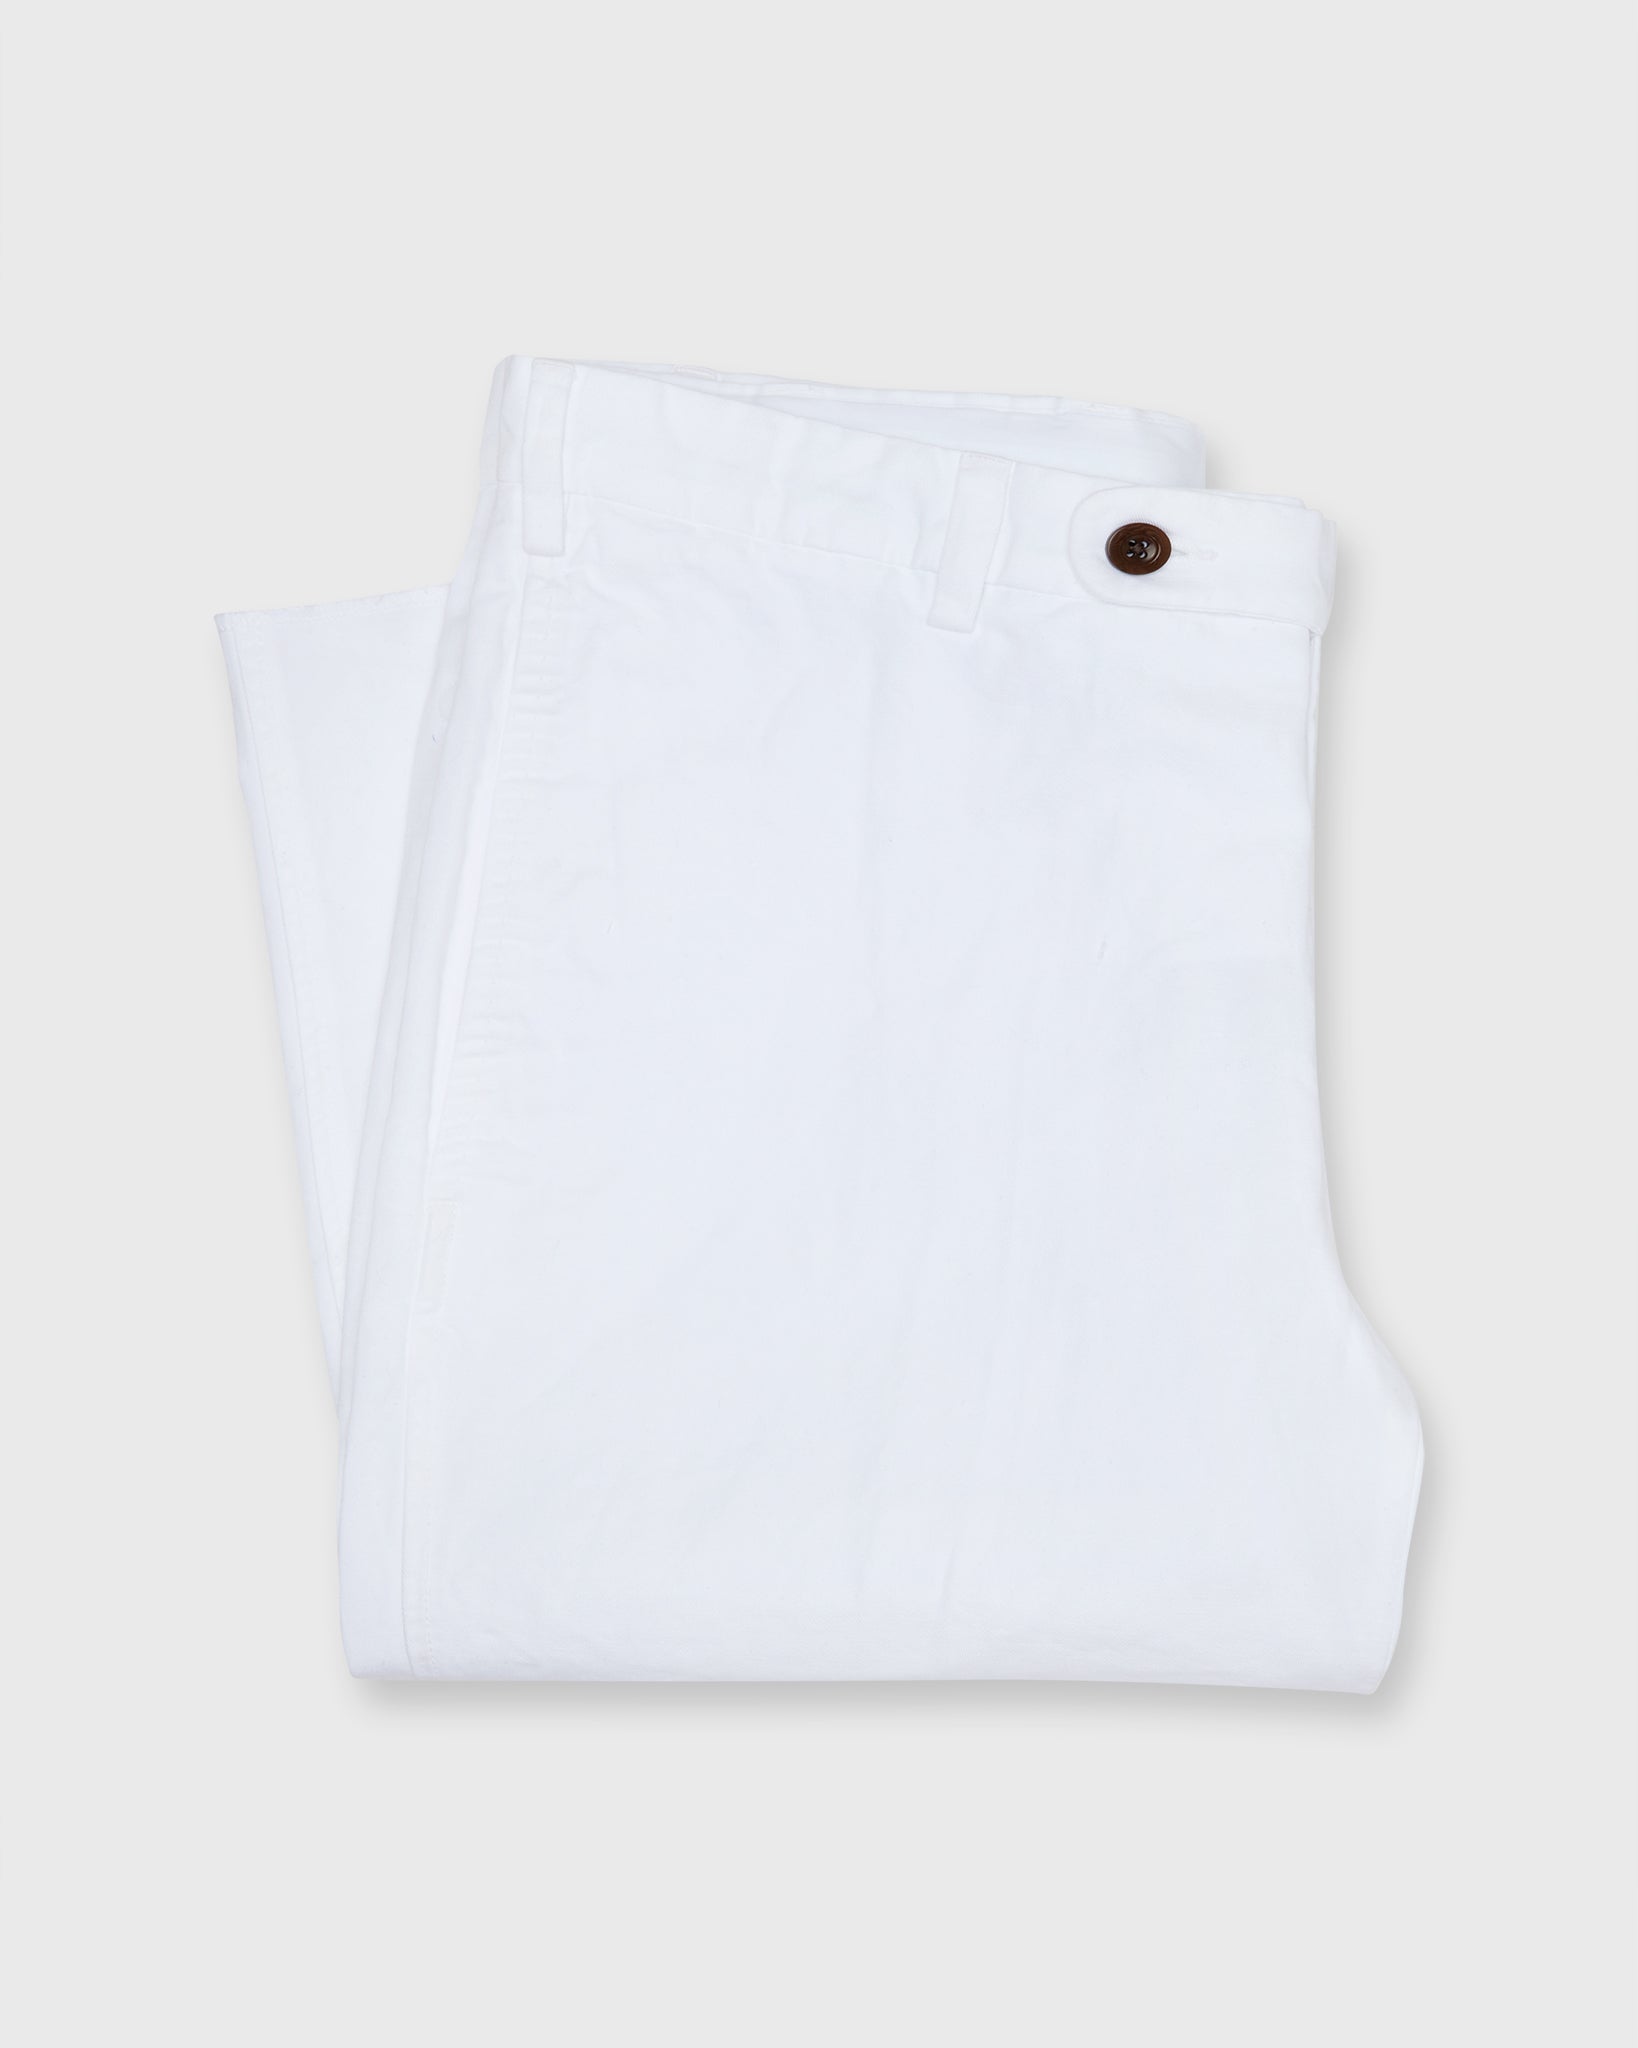 Garment-Dyed Sport Trouser in White Cotolino Twill